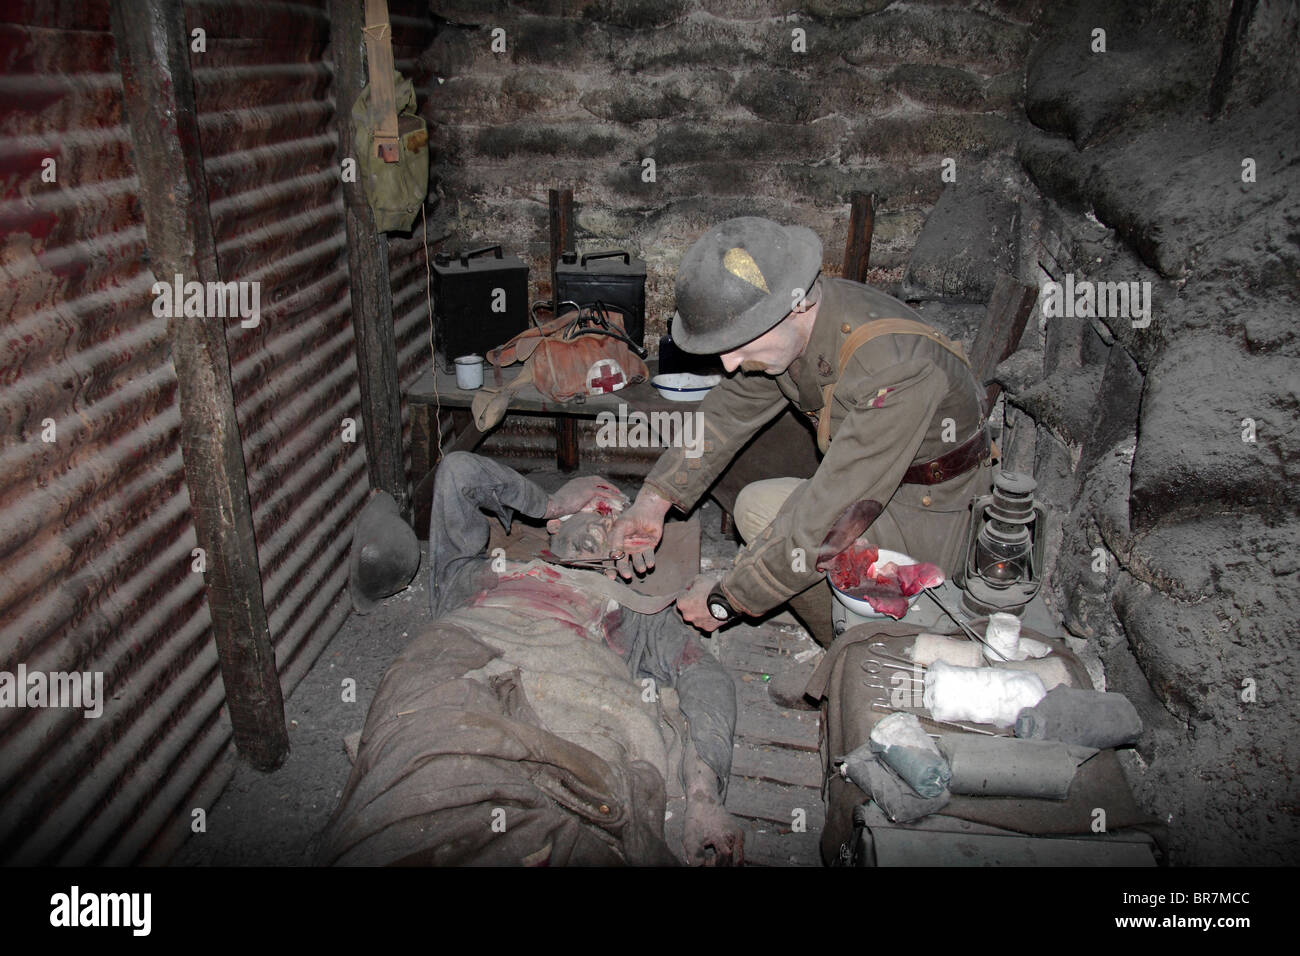 Medic at work. Recreation of life in the trenches of World War One at the Imperial War Museum, London, UK. Stock Photo